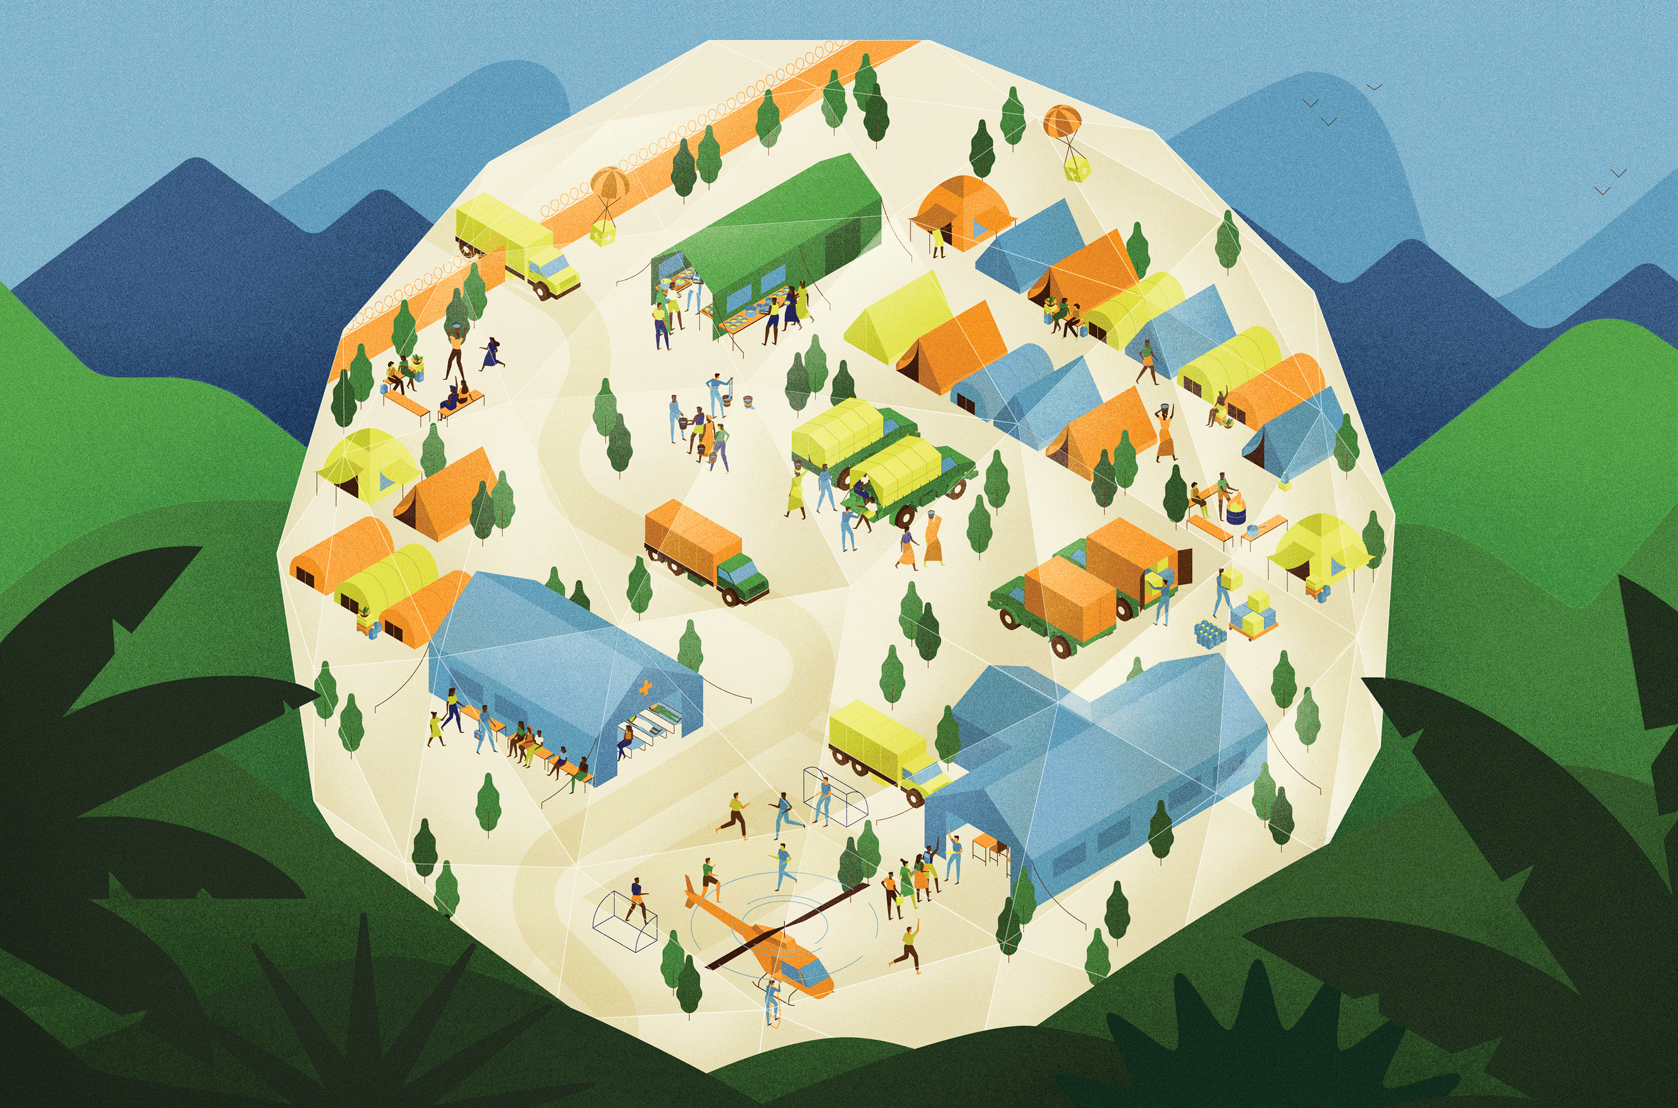 Illustration of people and tents